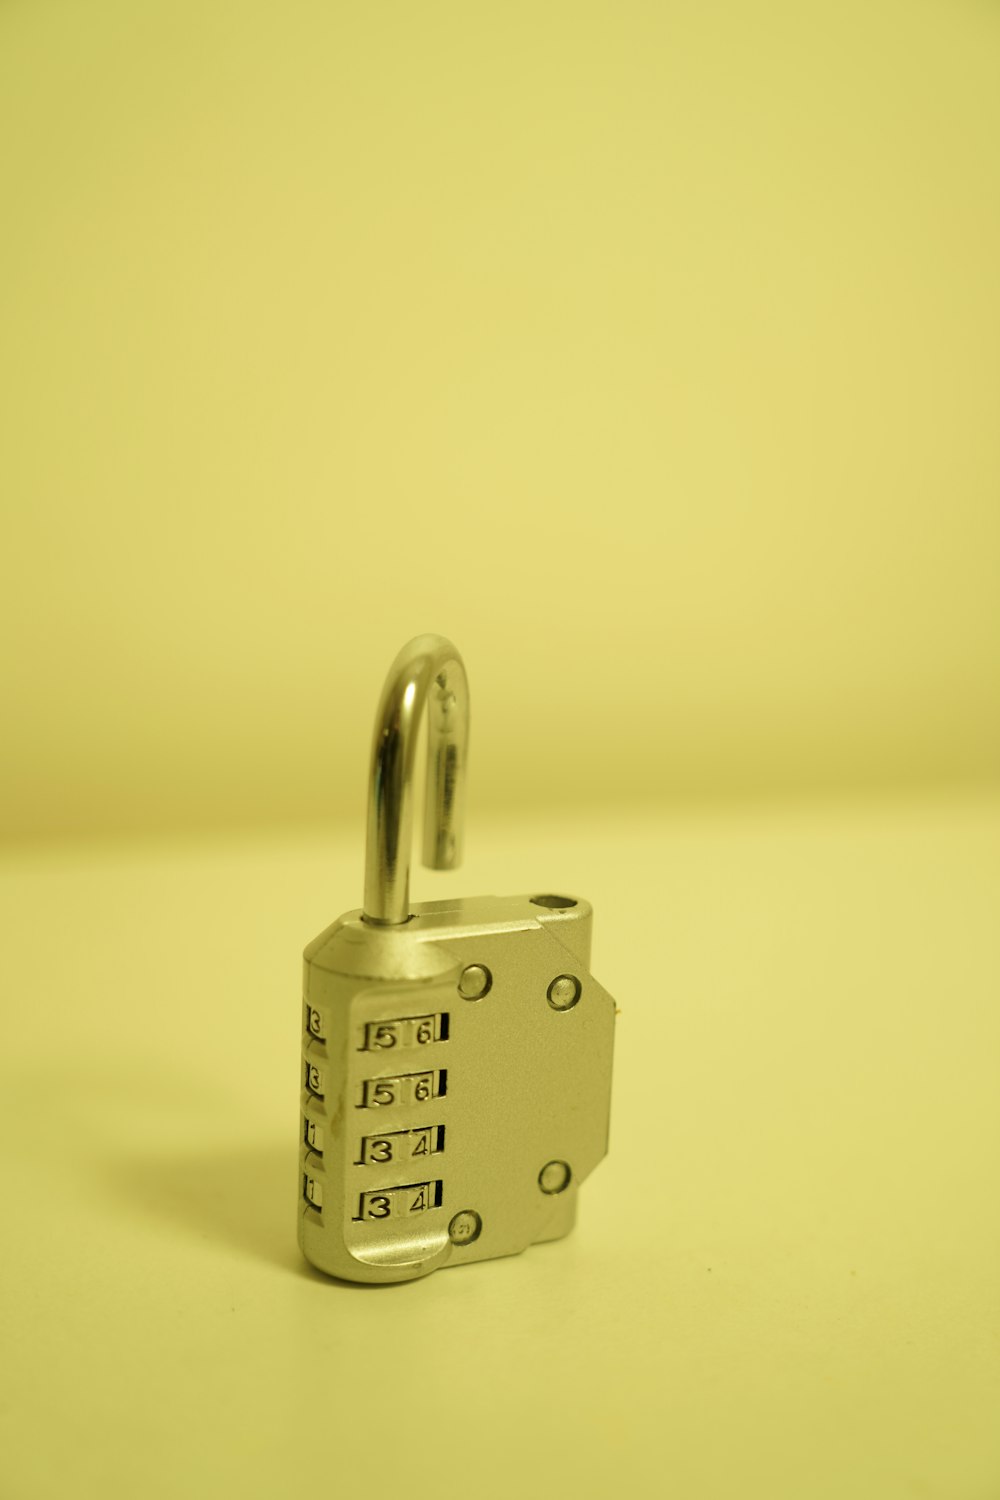 a combination combination lock on a yellow background